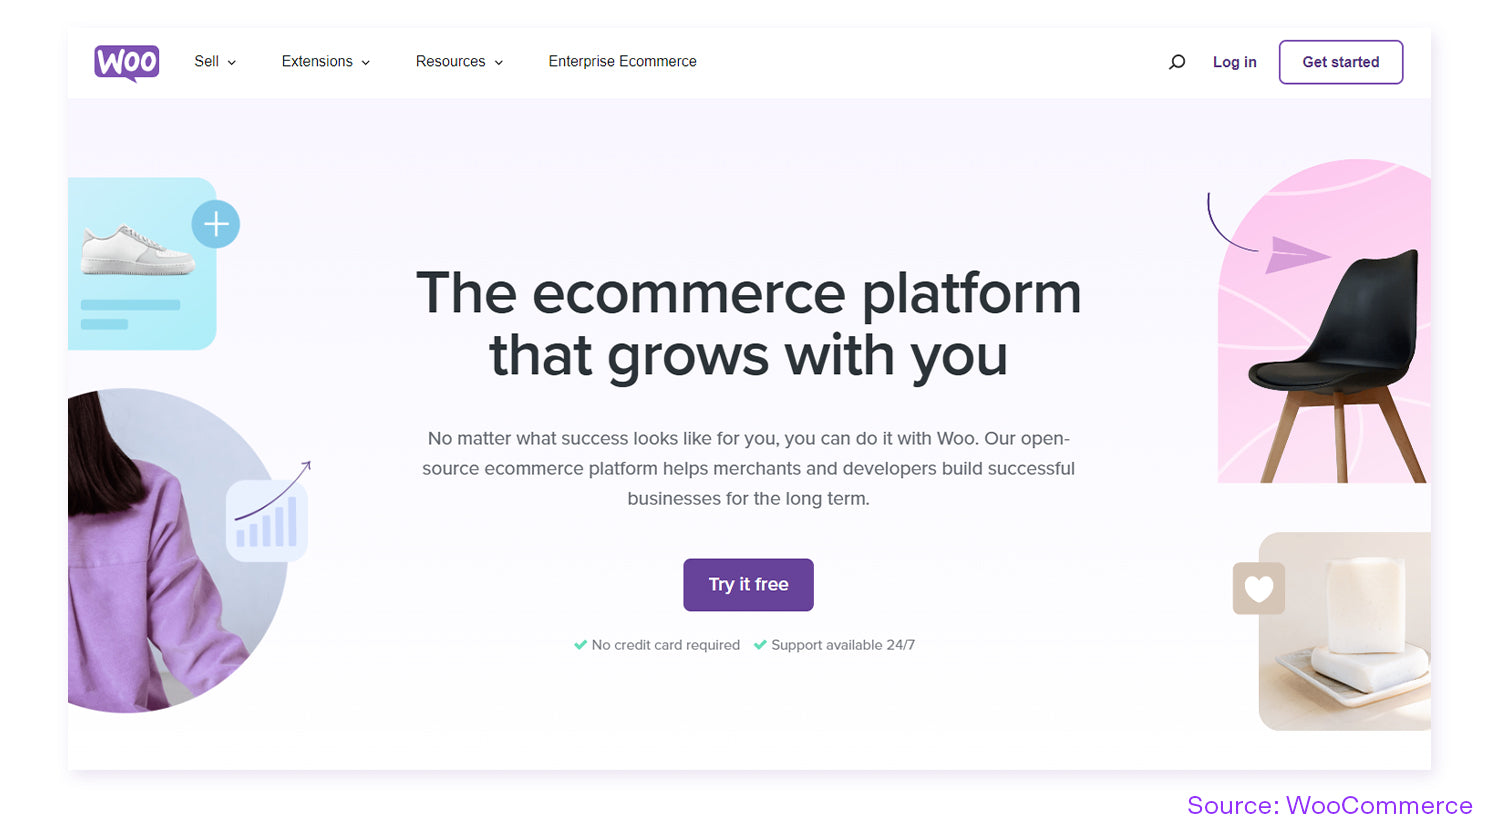 WooCommerce is one of the most popular ecommerce platforms and gives businesses the control and freedom to build it however they please.